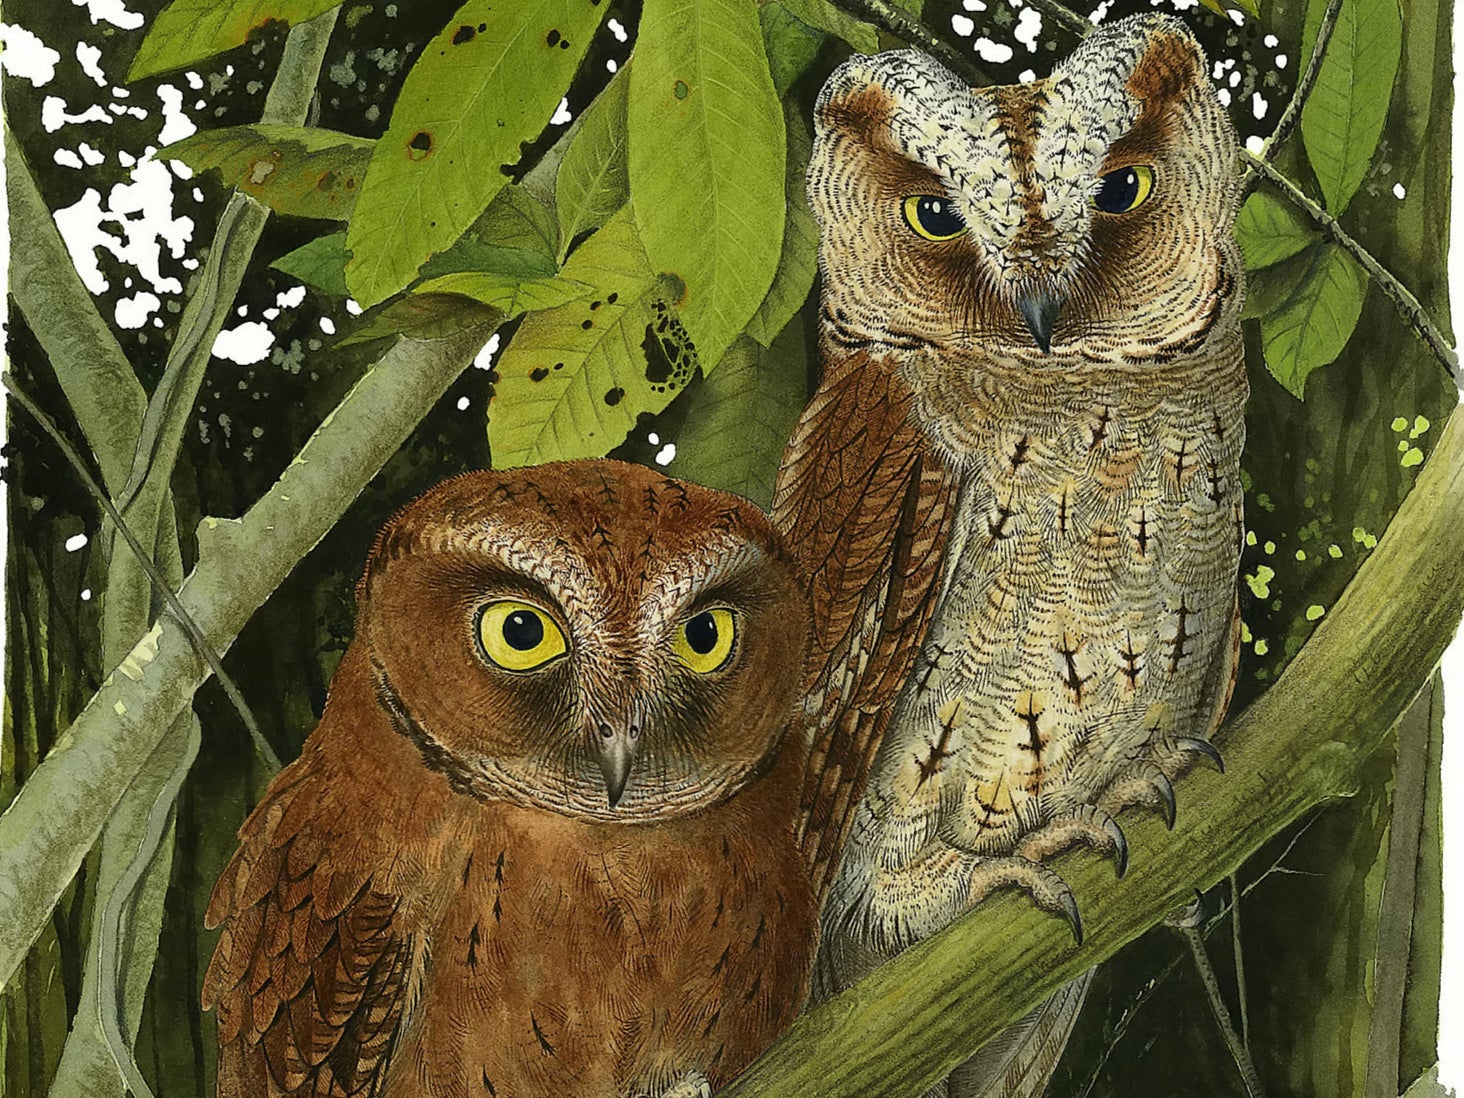 The owls have a unique call repeated at a rate of about one note per second, reminiscent of insect calls